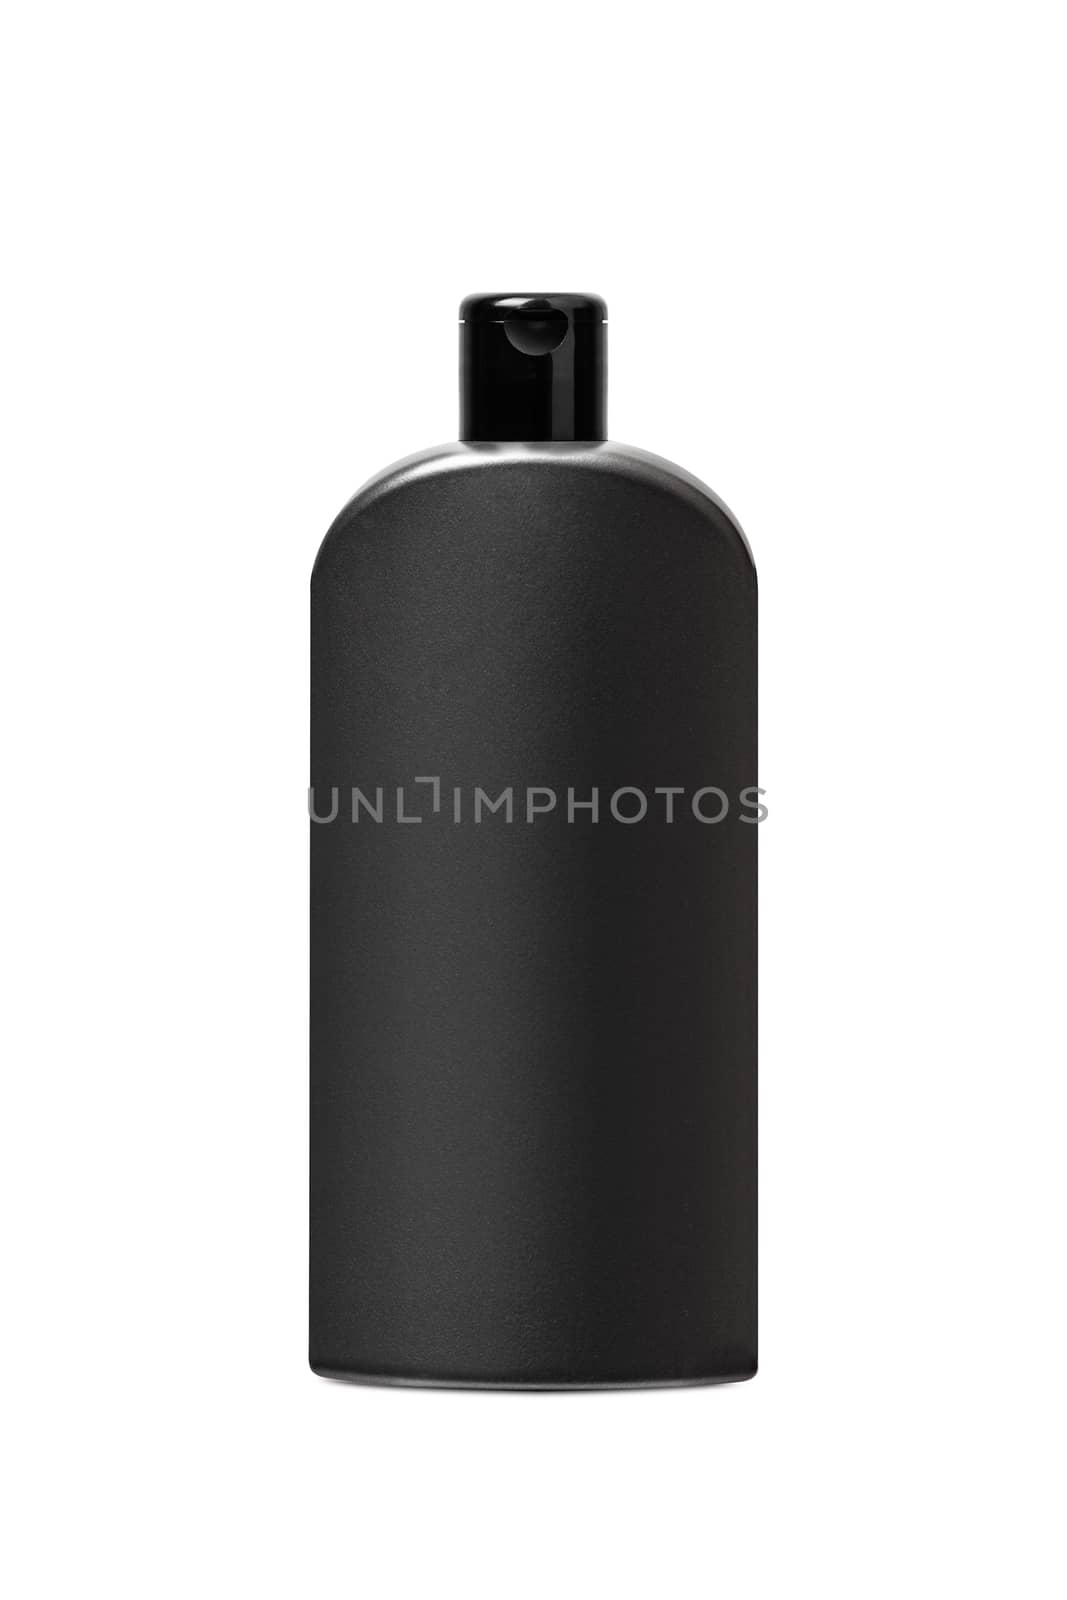 Black plastic bottle for shampoo or cosmetics, isolated on white background. Clipping Path